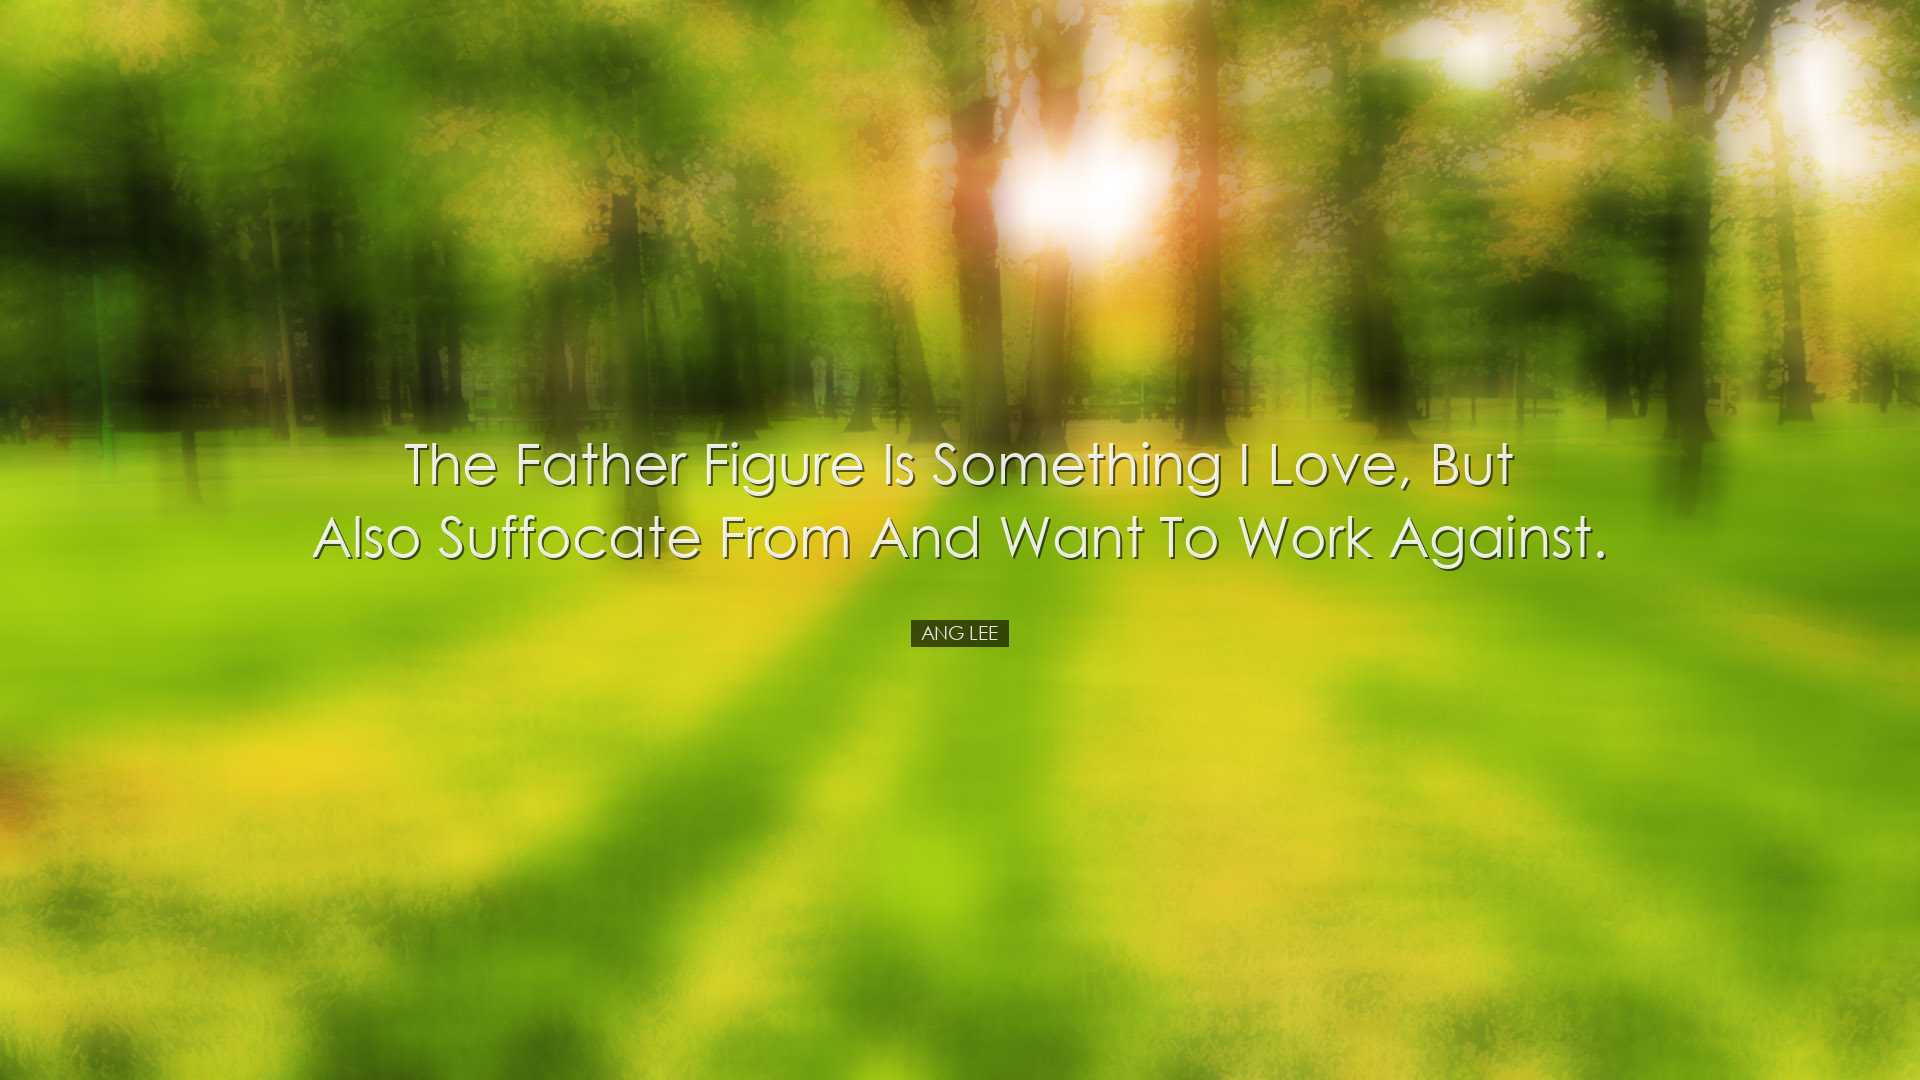 The father figure is something I love, but also suffocate from and